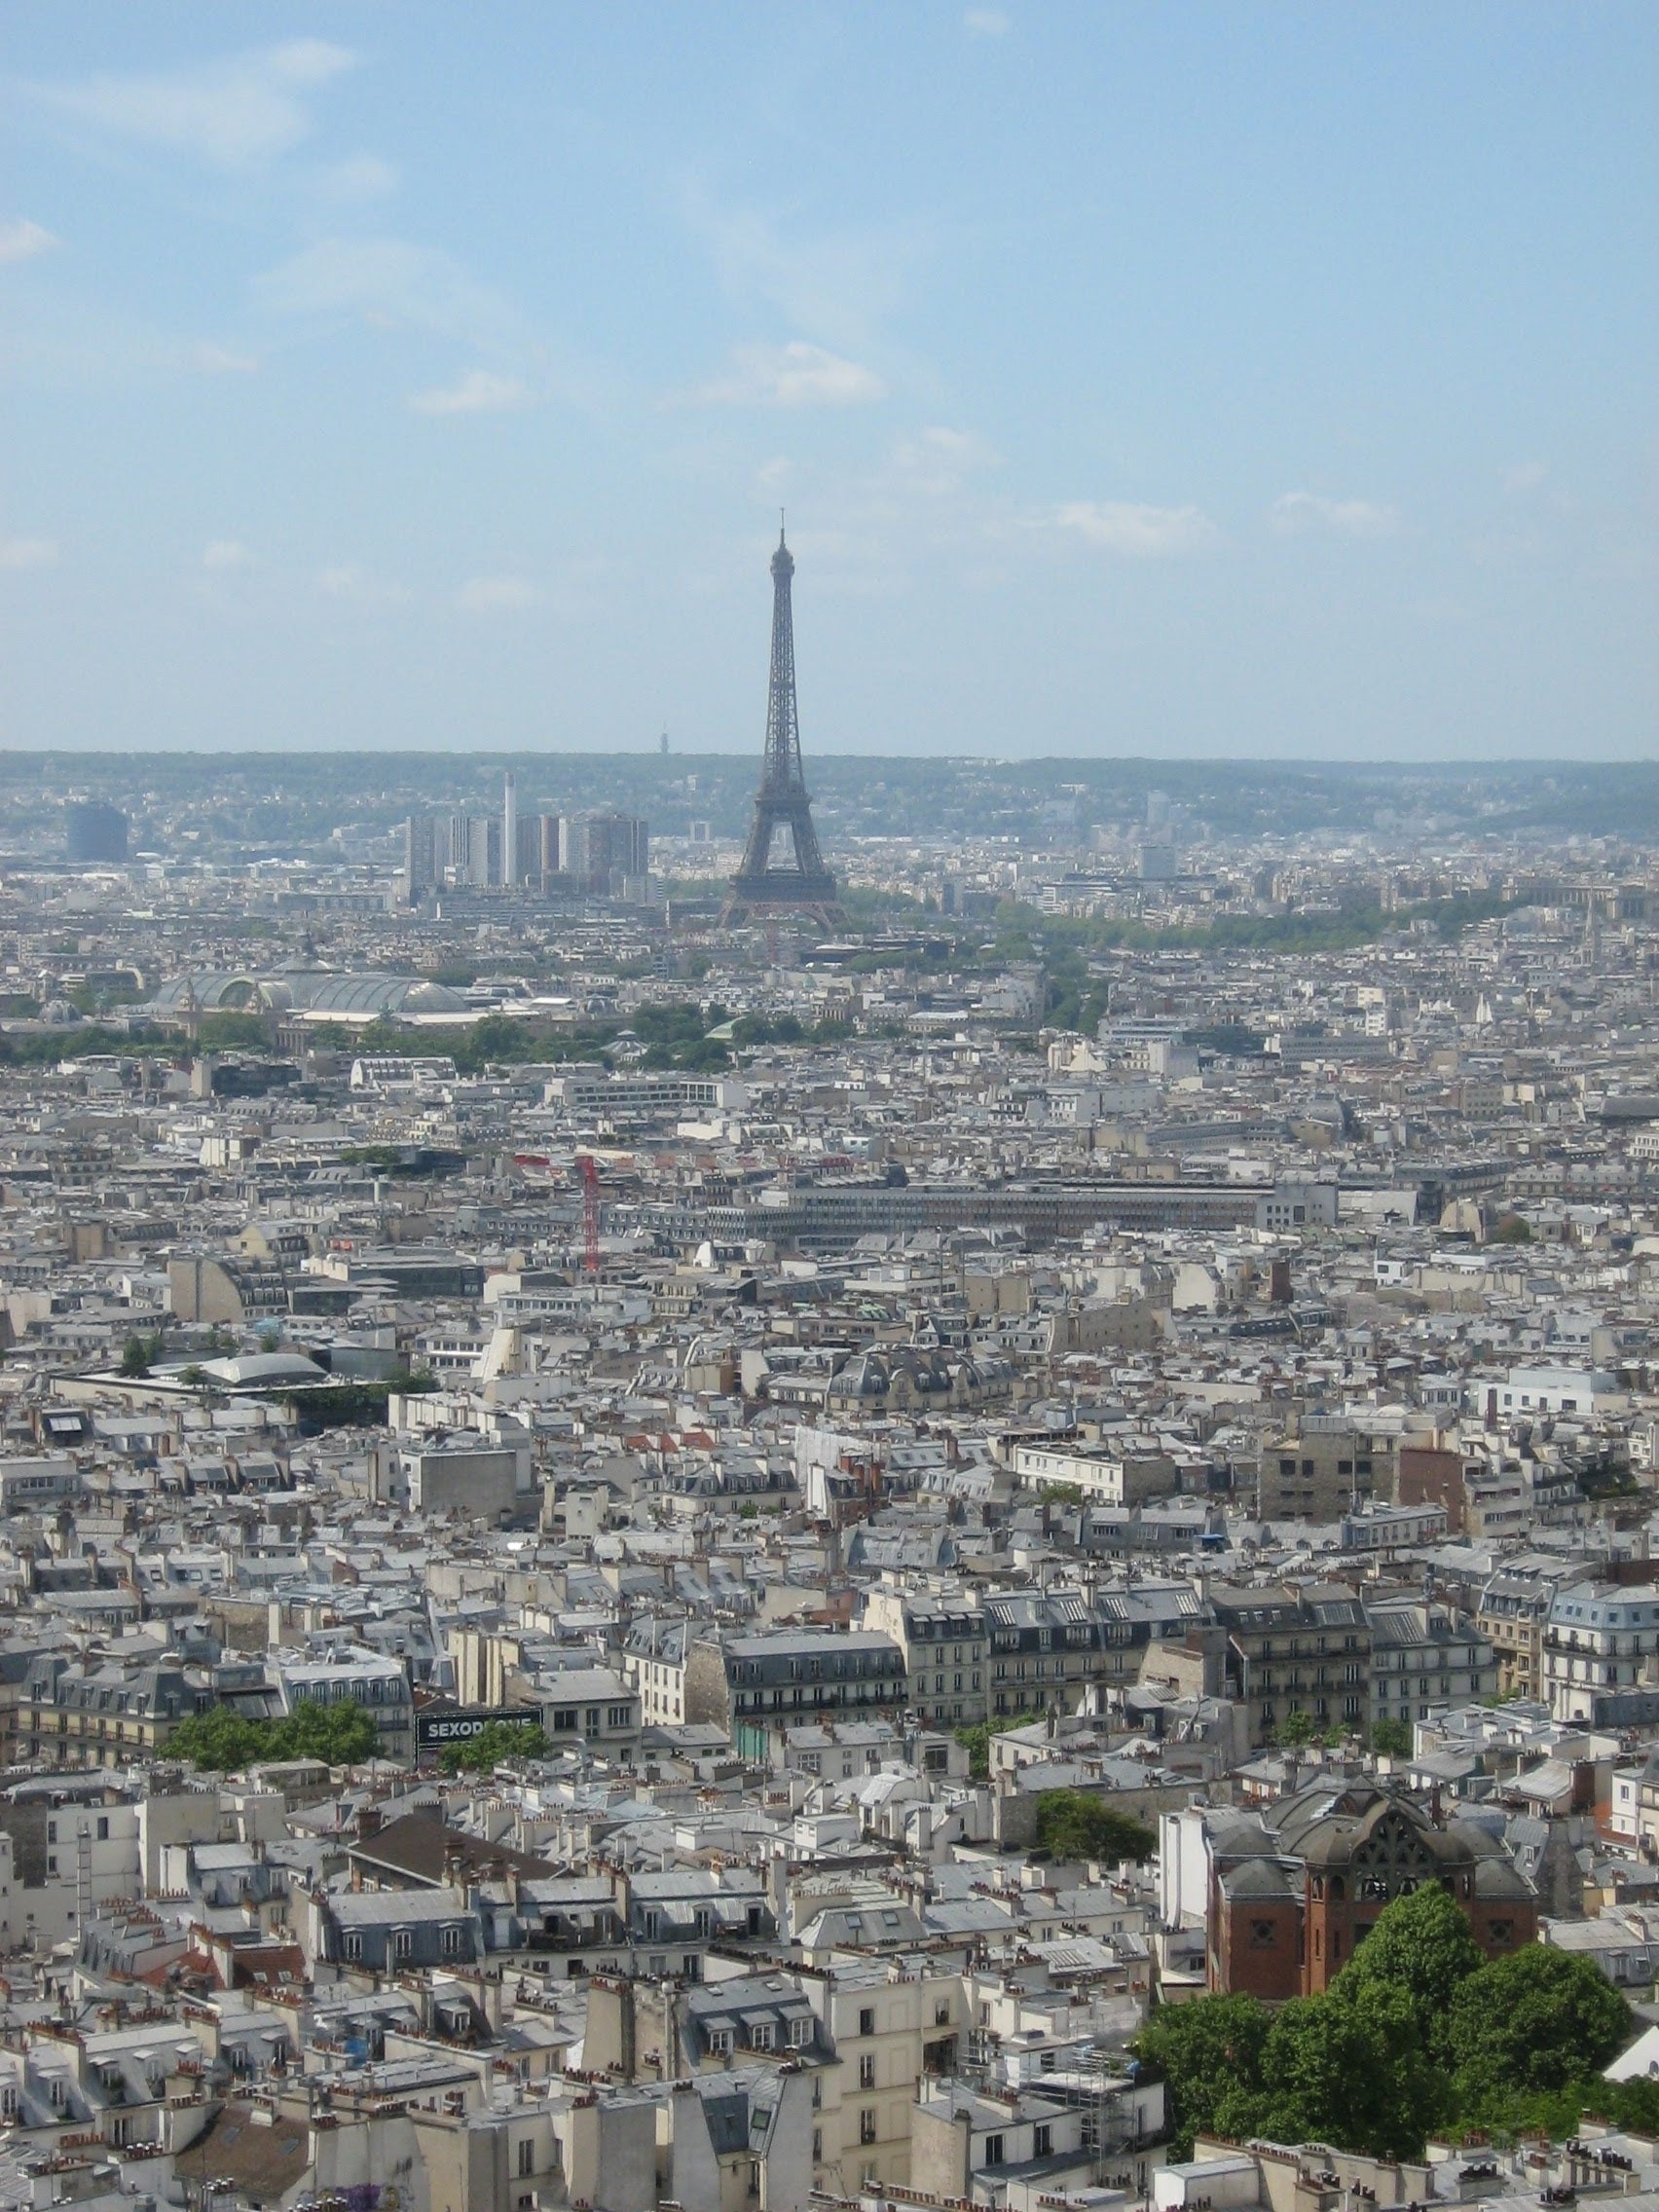 View of Paris, a lot of rooftops, with the eifel tower towering above everything else  